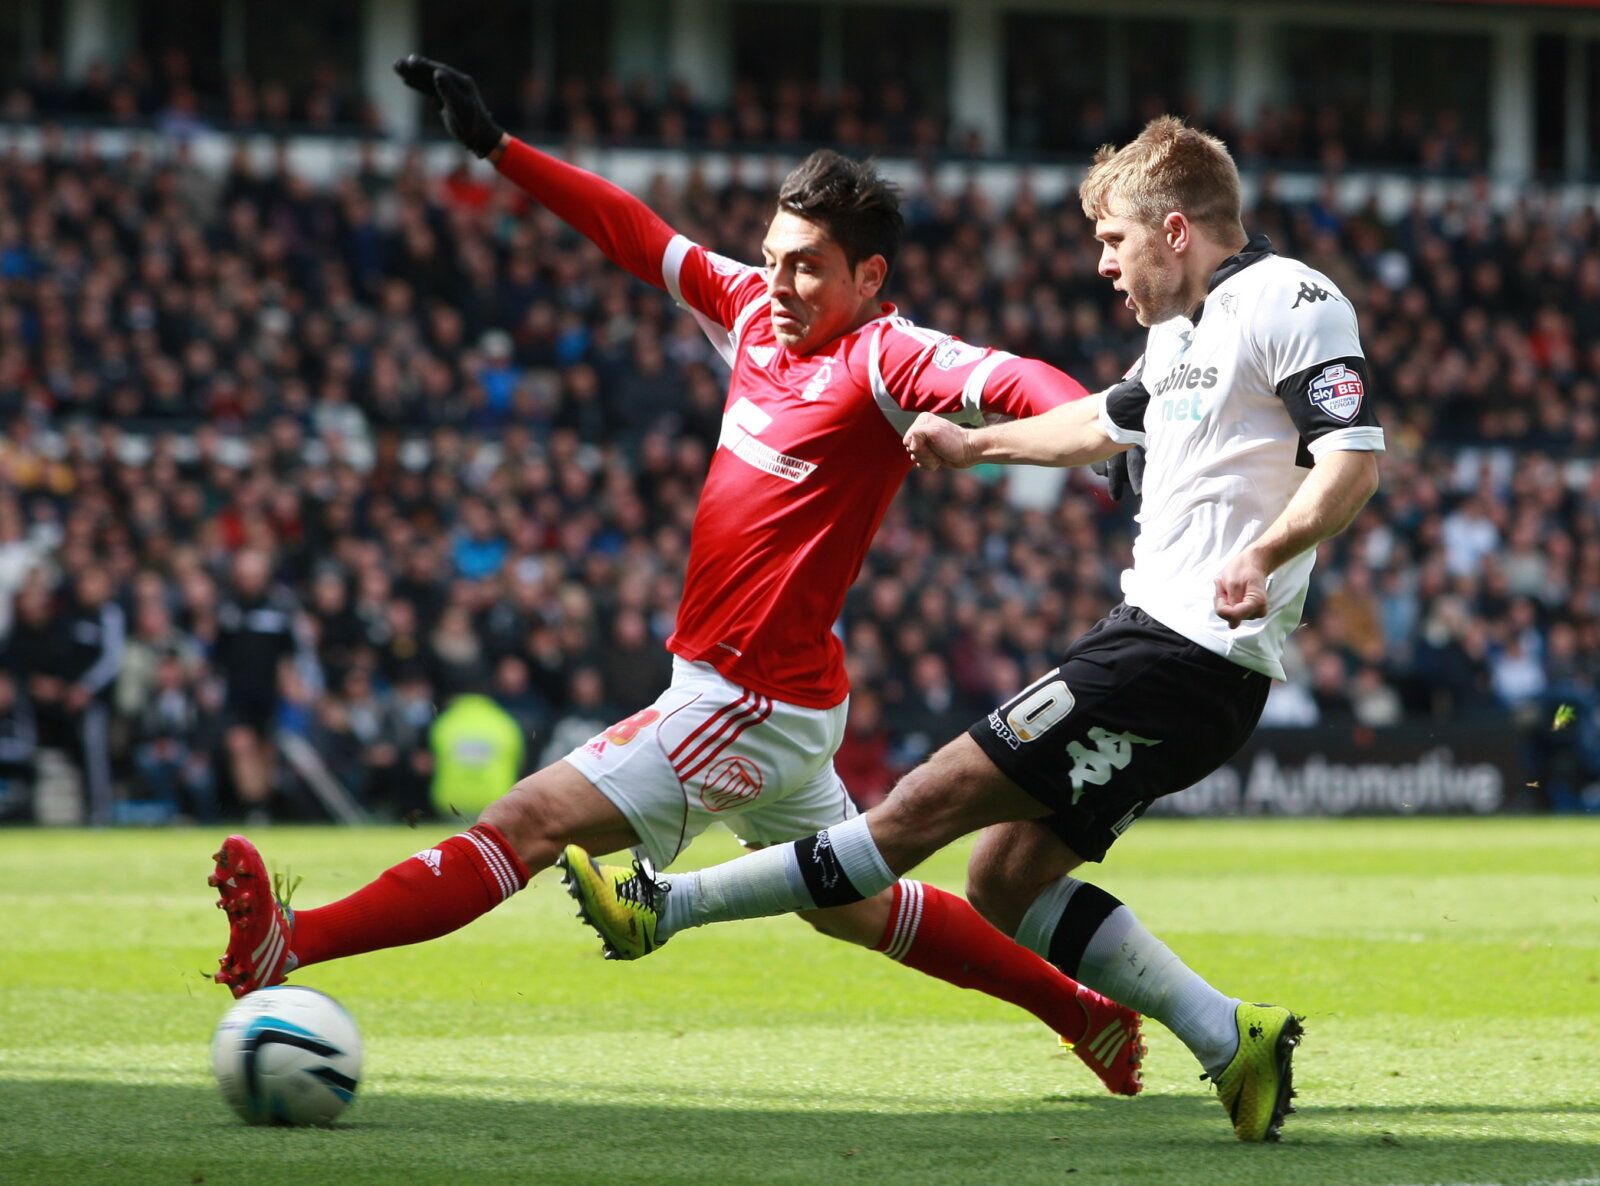 Football - Derby County v Nottingham Forest - Sky Bet Football League Championship - iPro Stadium - 13/14 - 22/3/14 
Derby's Jamie Ward in action with Nottingham Forest's Gonzalo Jara  
Mandatory Credit: Action Images / David Field  
EDITORIAL USE ONLY. No use with unauthorized audio, video, data, fixture lists, club/league logos or 